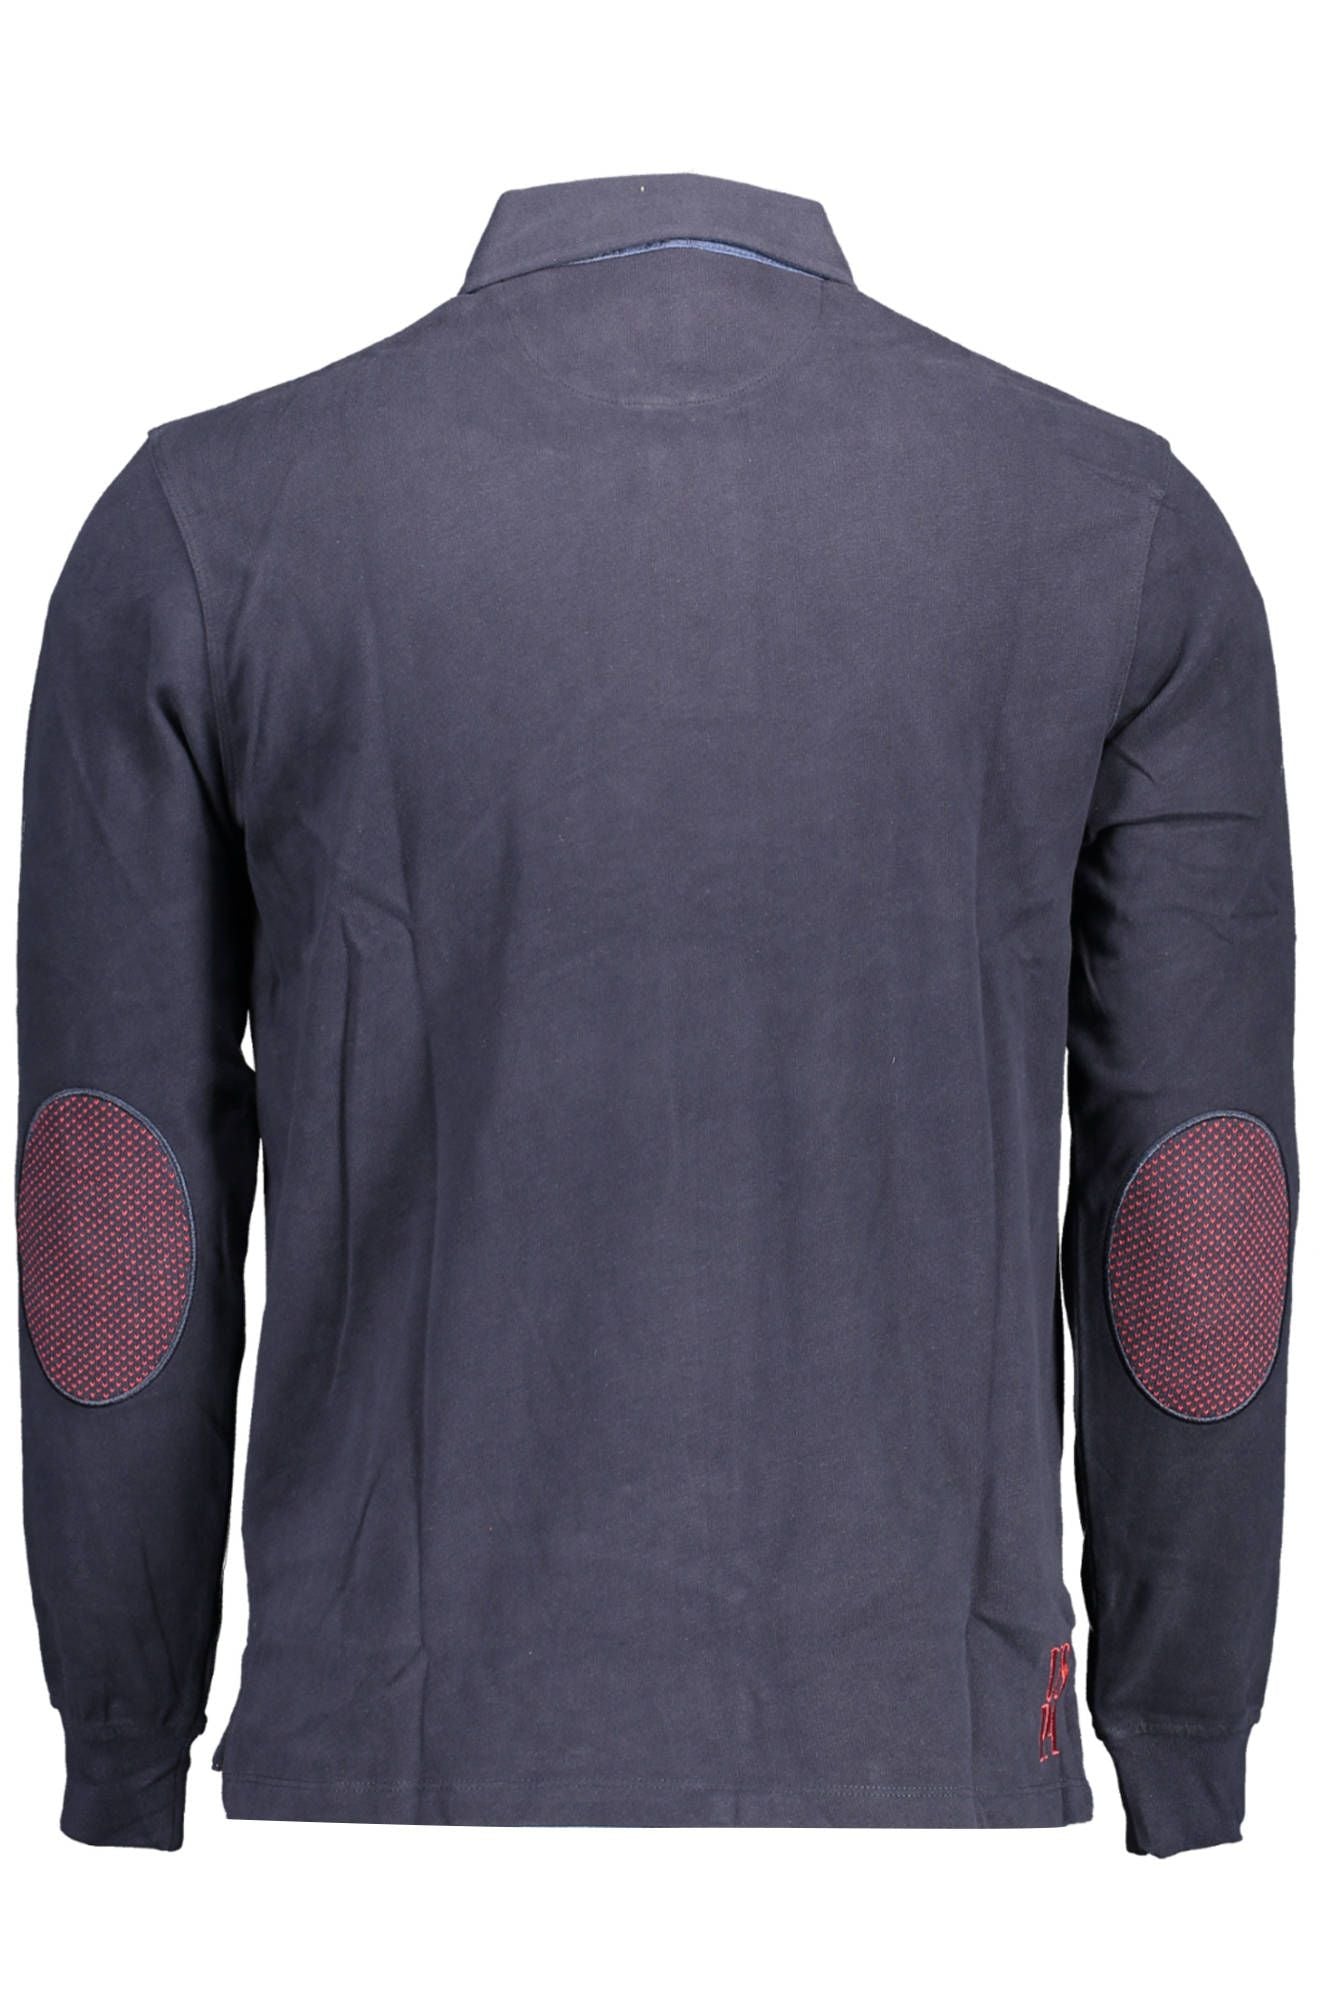 Elegant Long-Sleeve Polo with Contrasting Elbow Patches